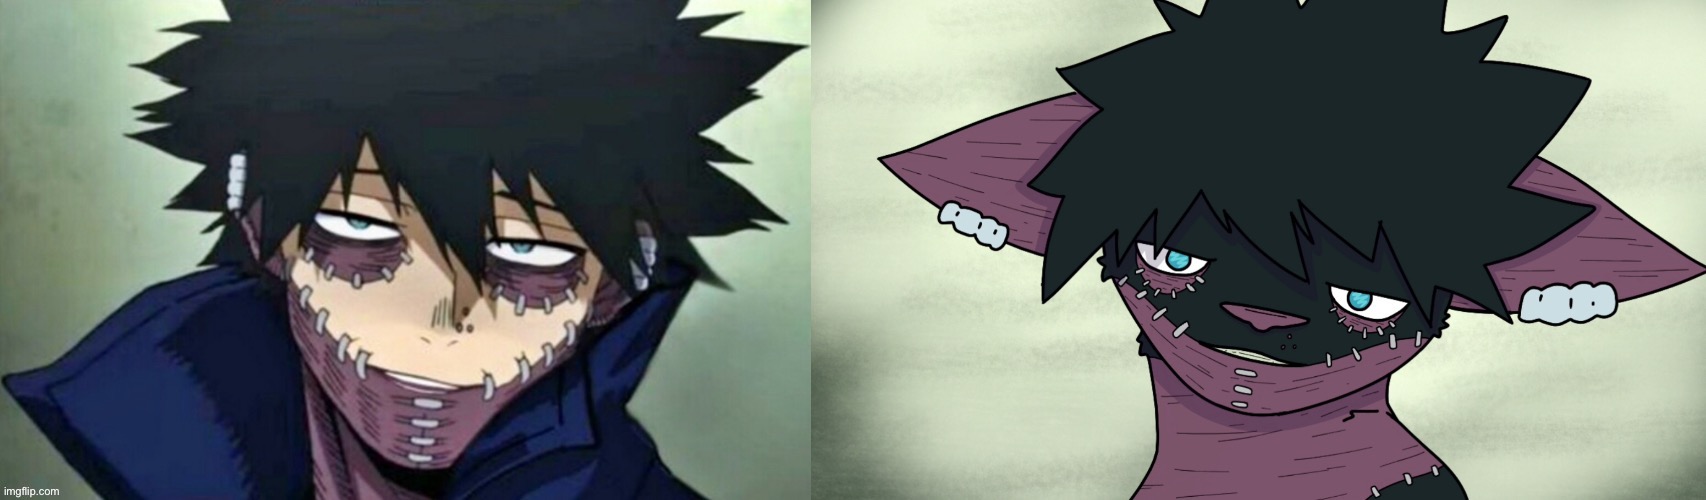 Rate 1-10 (turning Dabi into a furry LMAO) | made w/ Imgflip meme maker